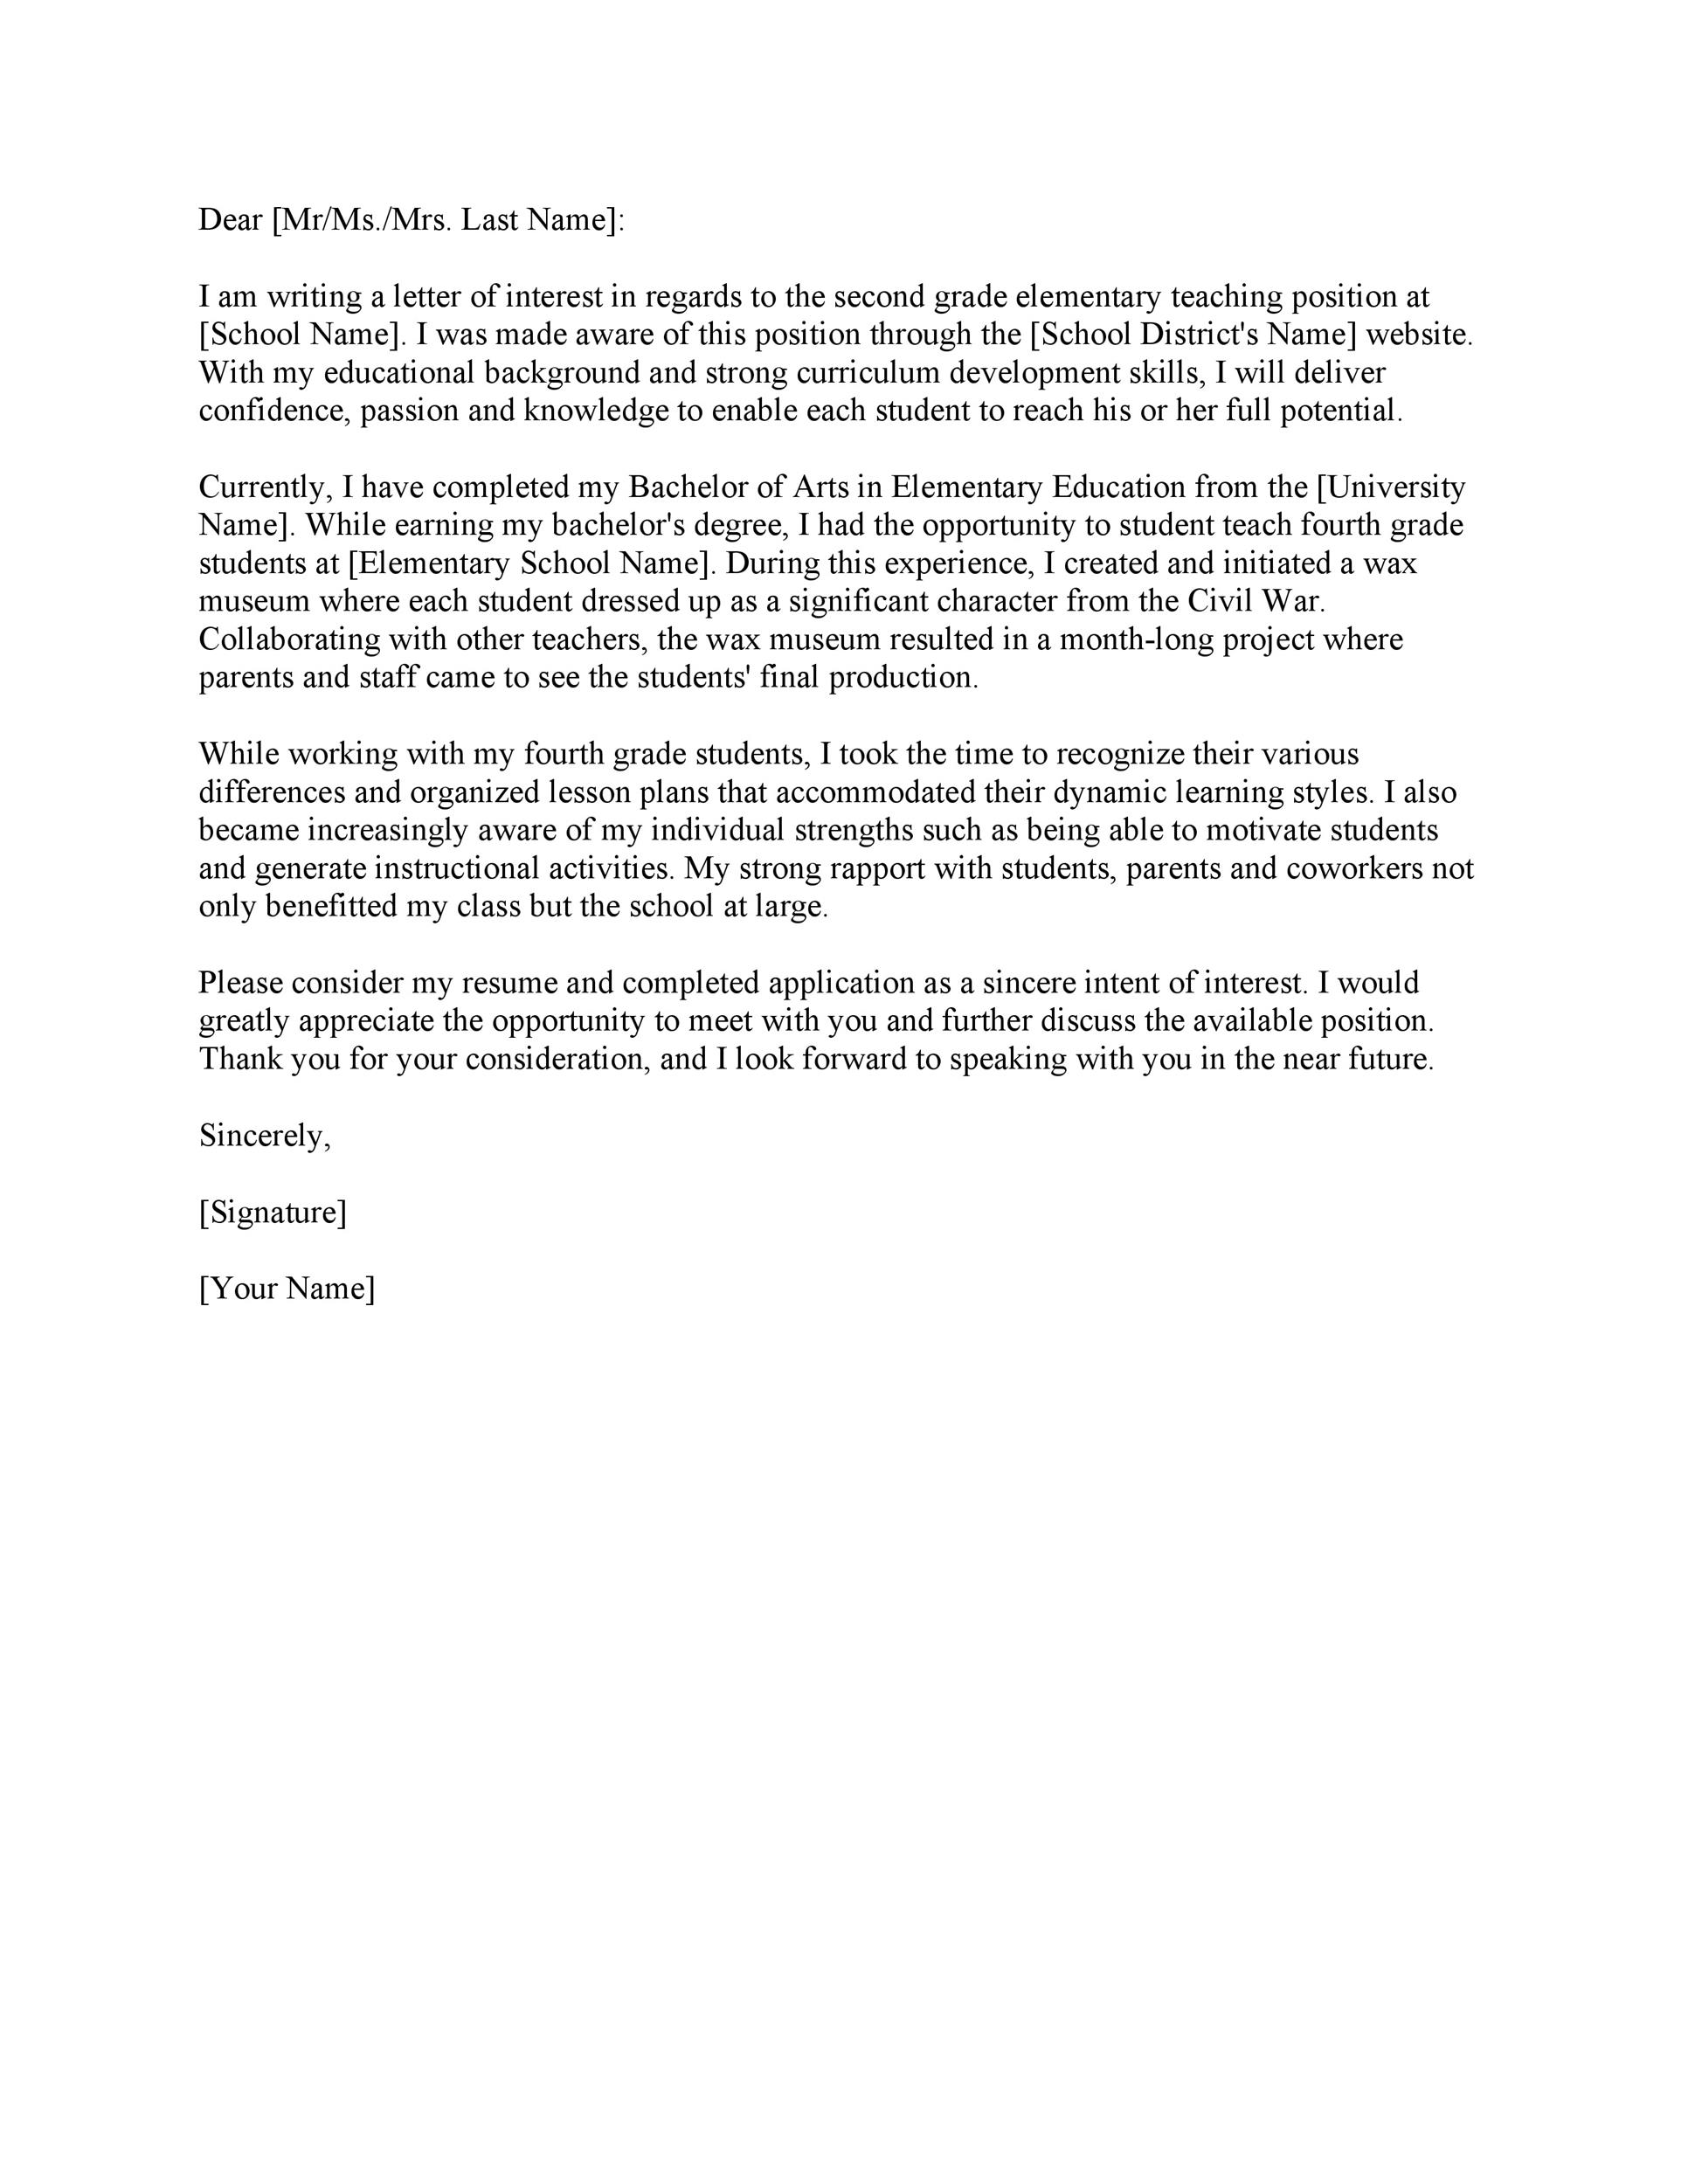 Cover Letter Opening Statements from templatelab.com